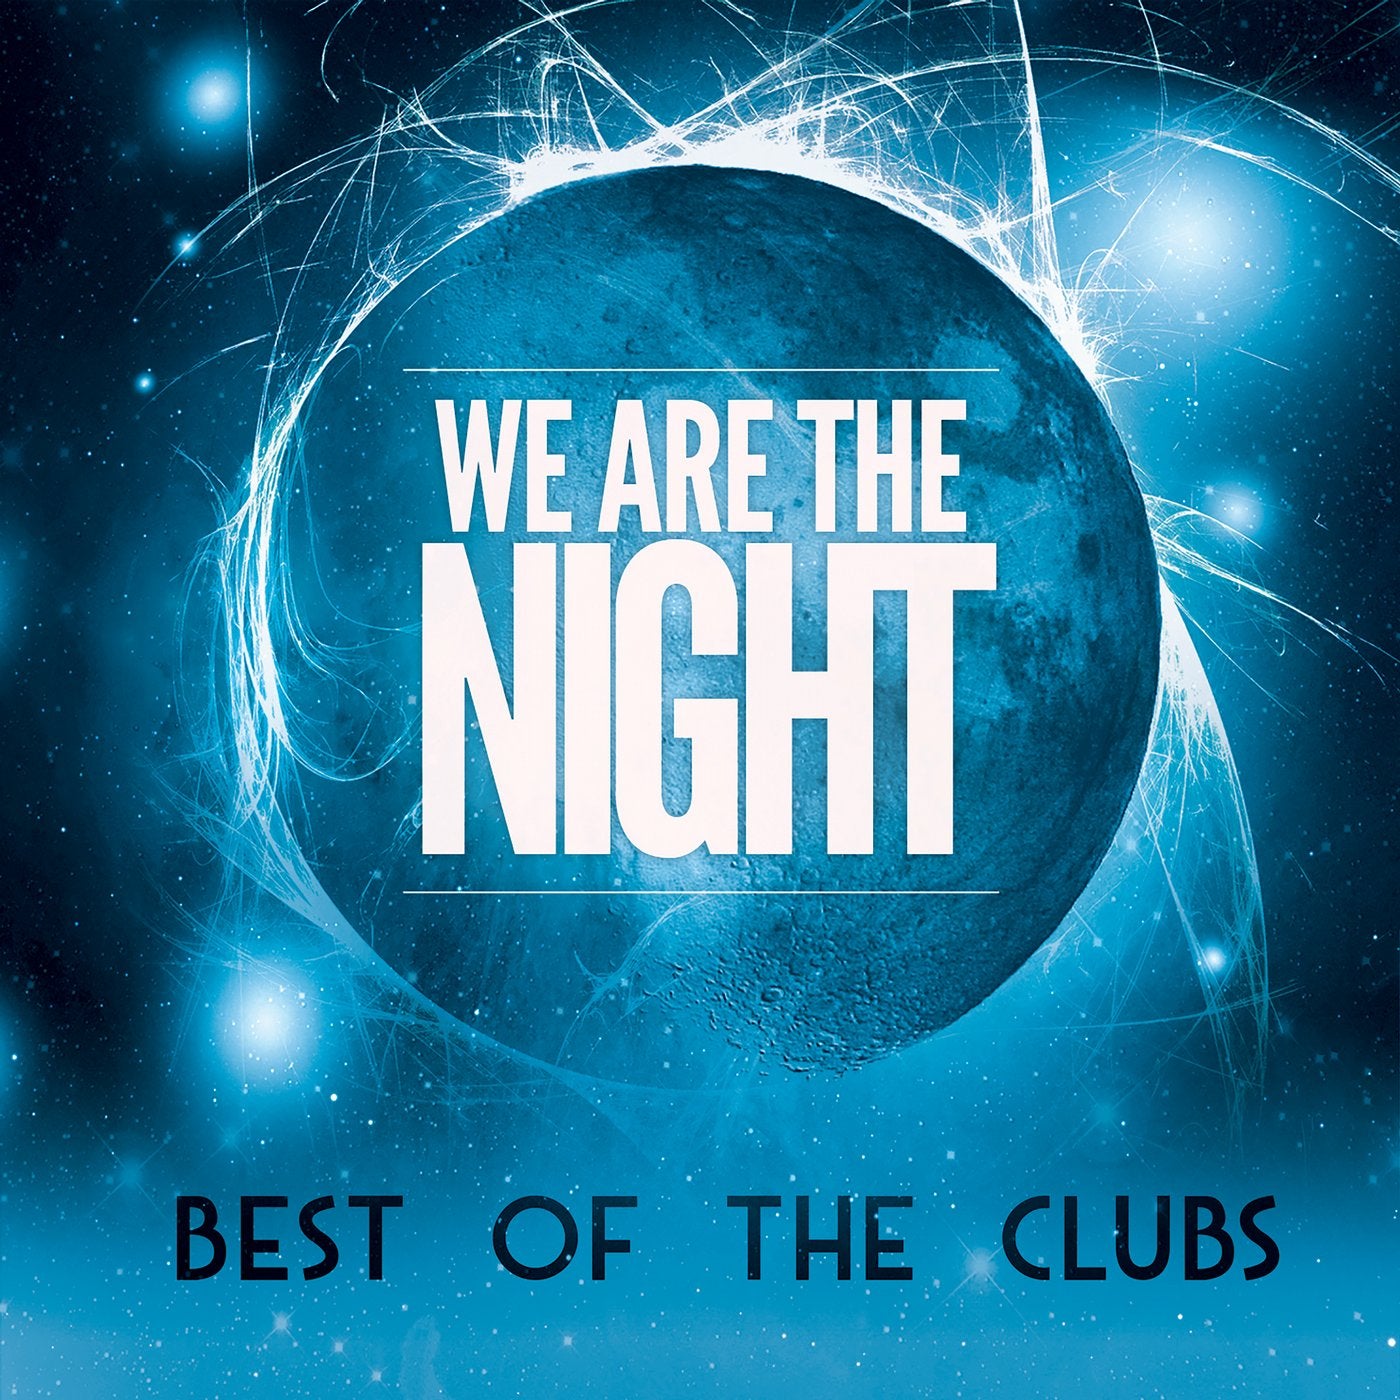 We Are the Night: Best of the Clubs